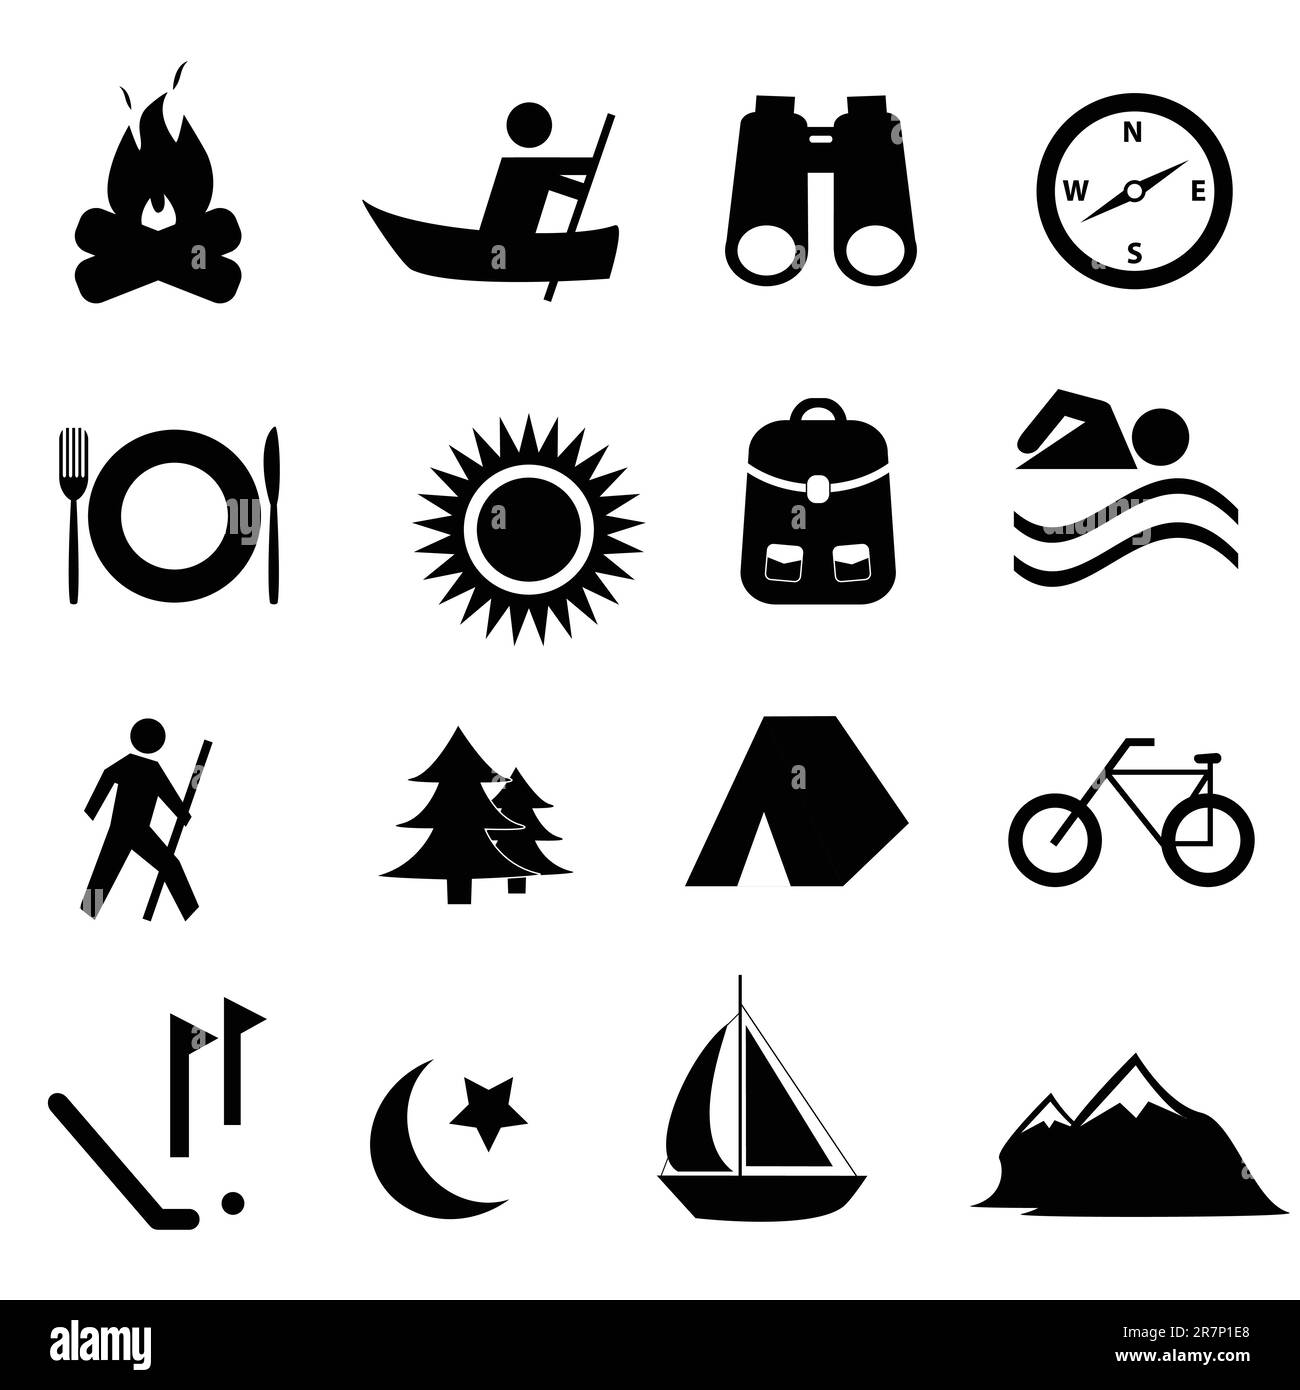 Leisure, sports and recreation icon set Stock Vector